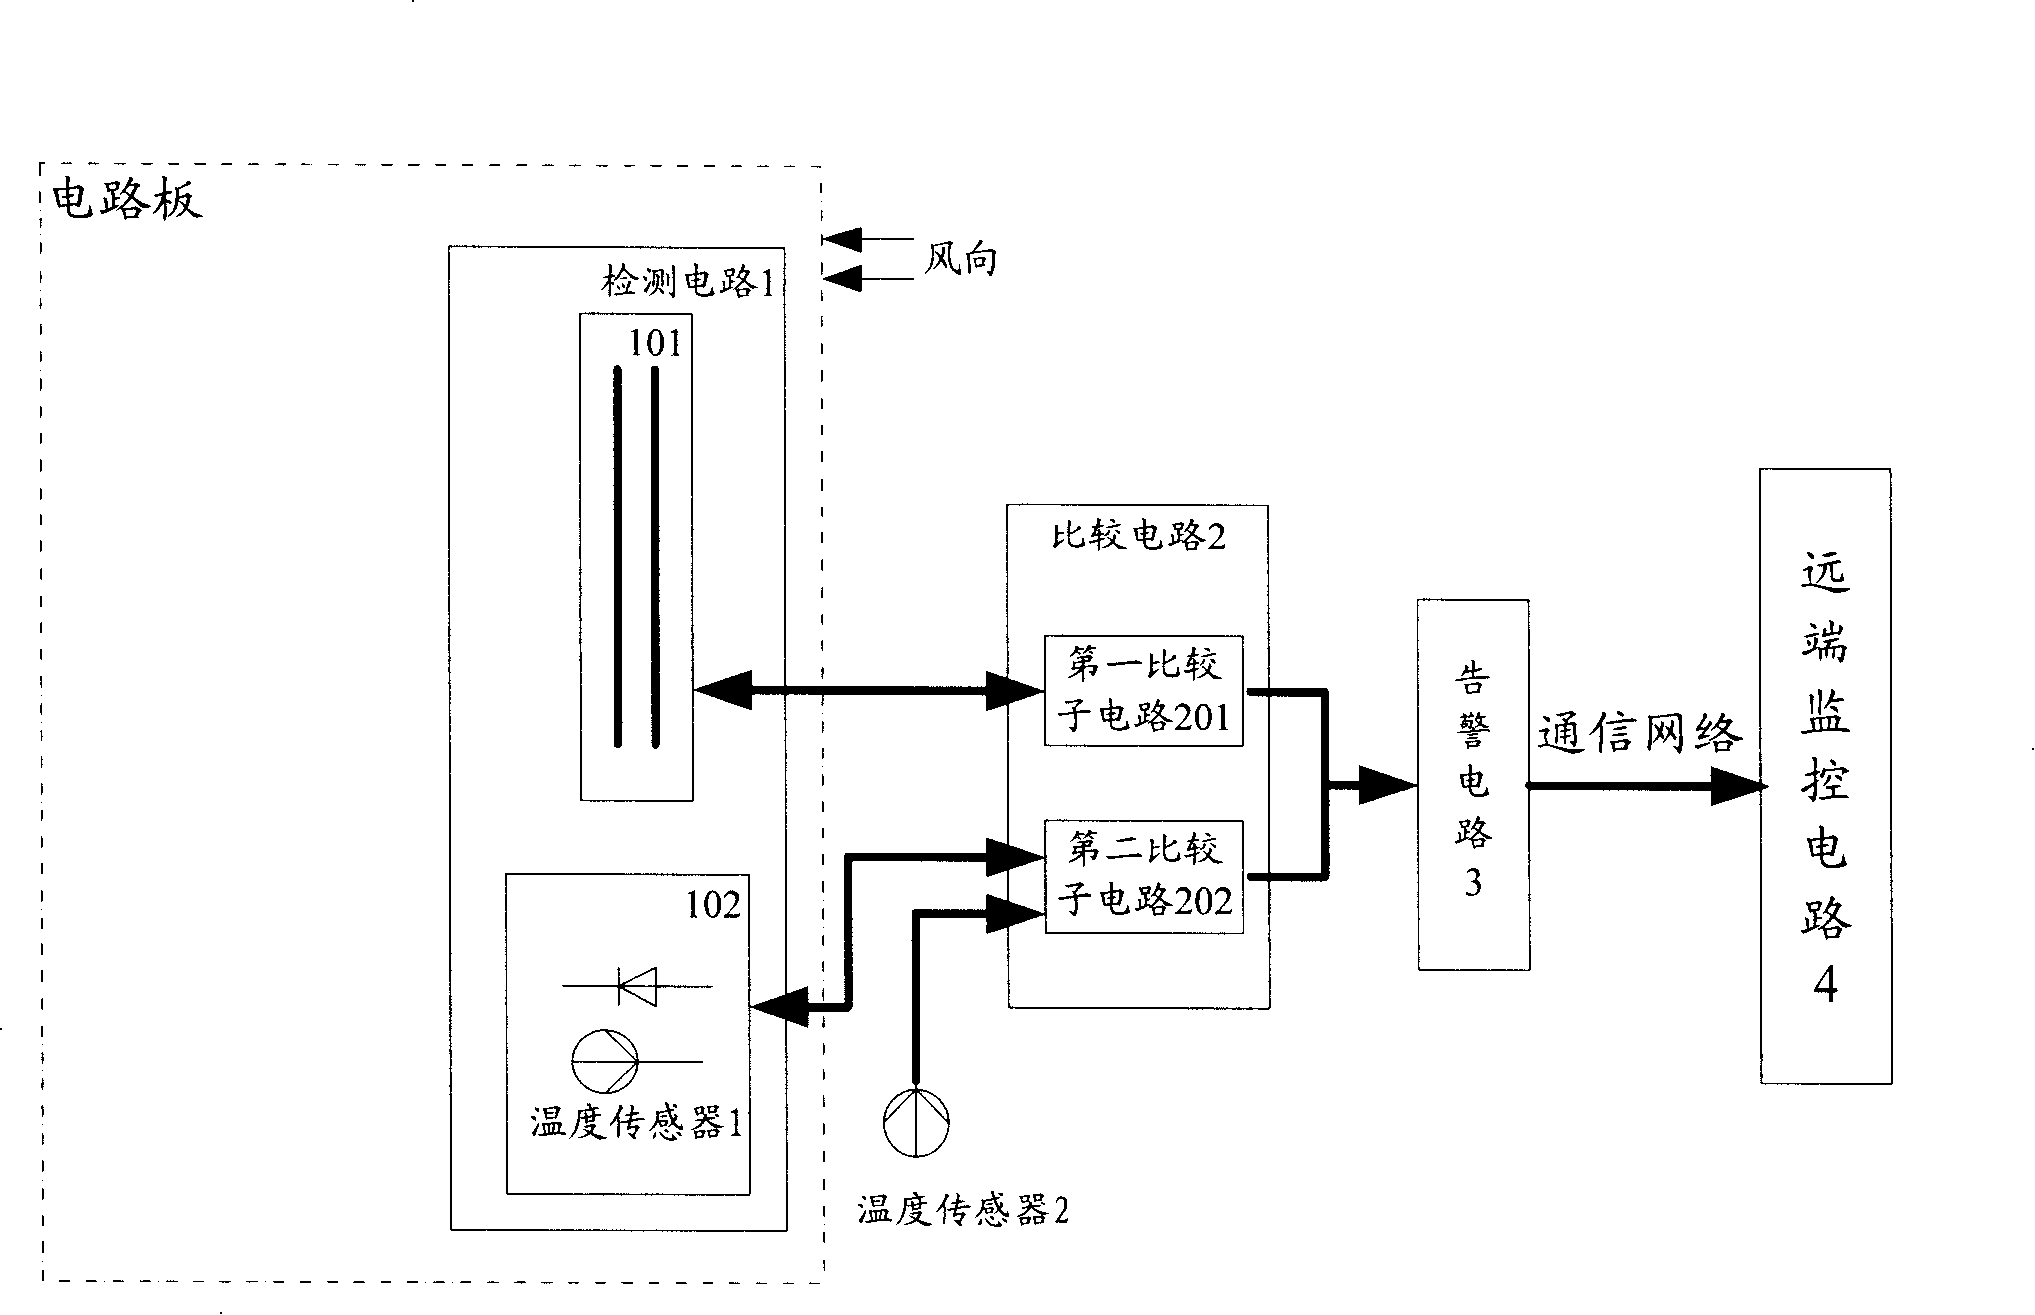 Method and system for detecting circuit board pollution